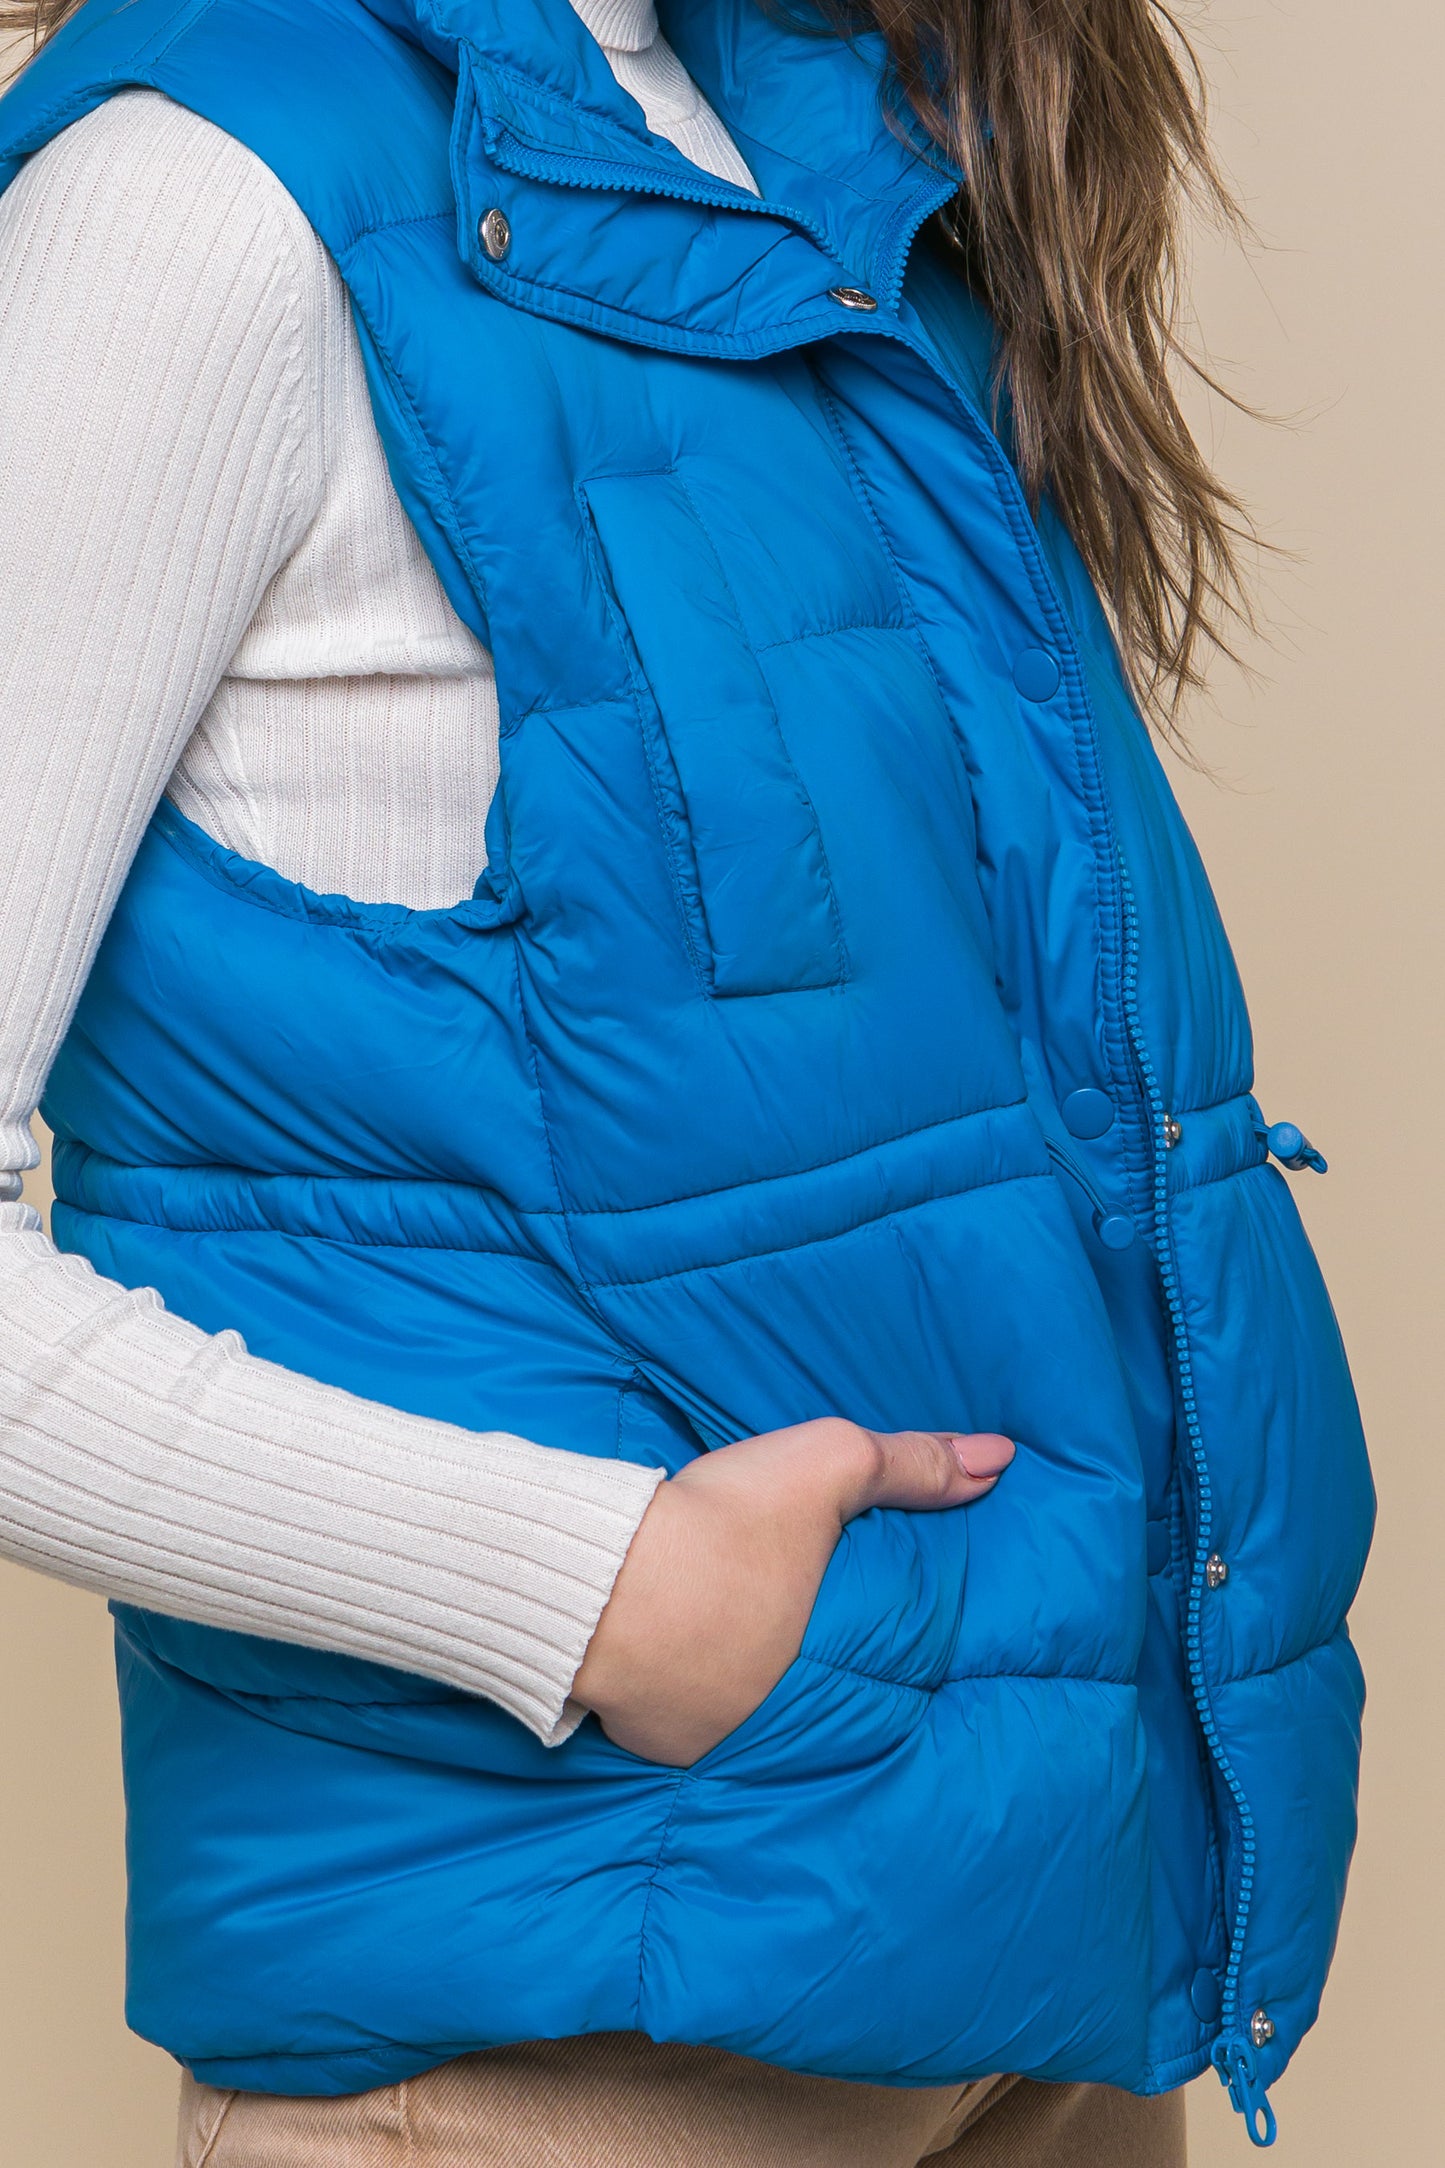 Zip Up Button Puffer Vest With Waist Toggles